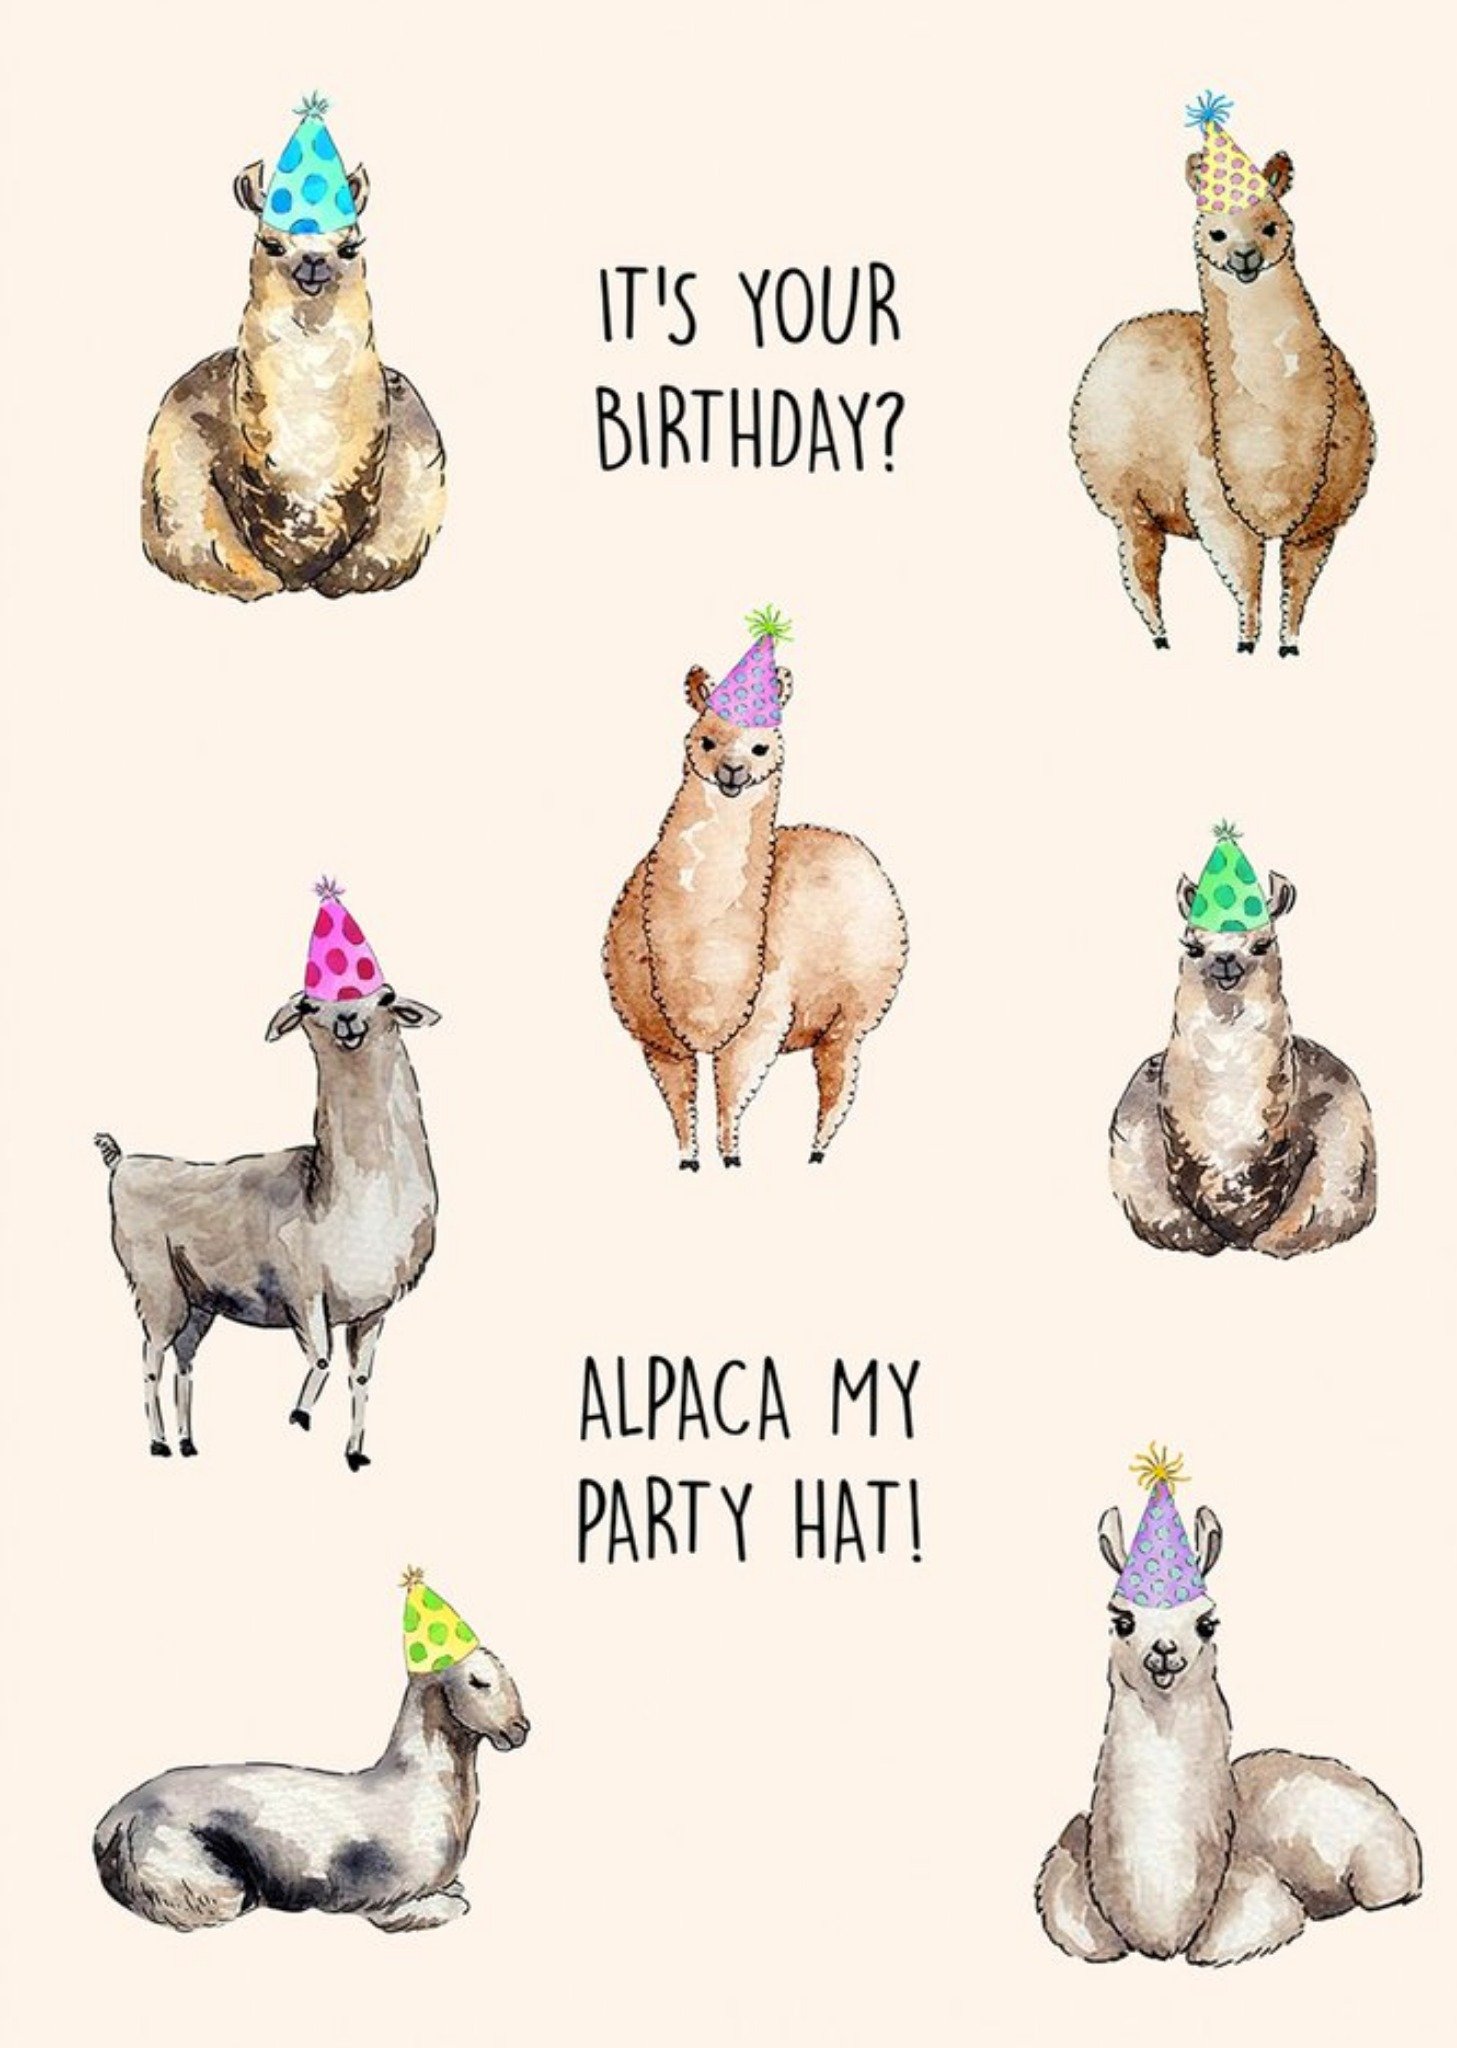 Moonpig Poppy And Mabel It's Your Birthday? Alpaca My Party Hat Birthday Card, Large